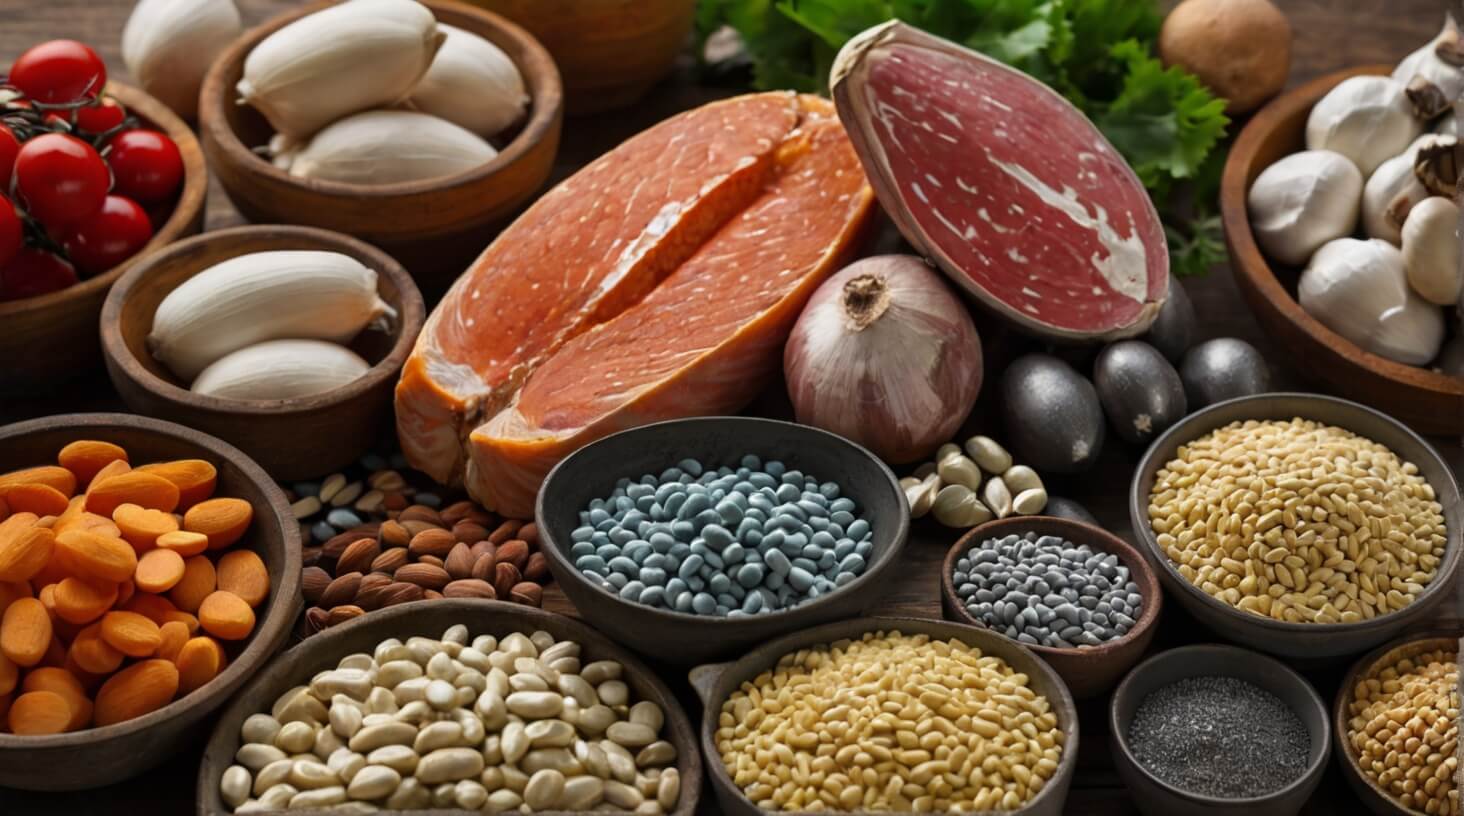 Image showing a variety of zinc-rich foods, including nuts, seeds, legumes, and lean meats, to promote optimal health and wellness.